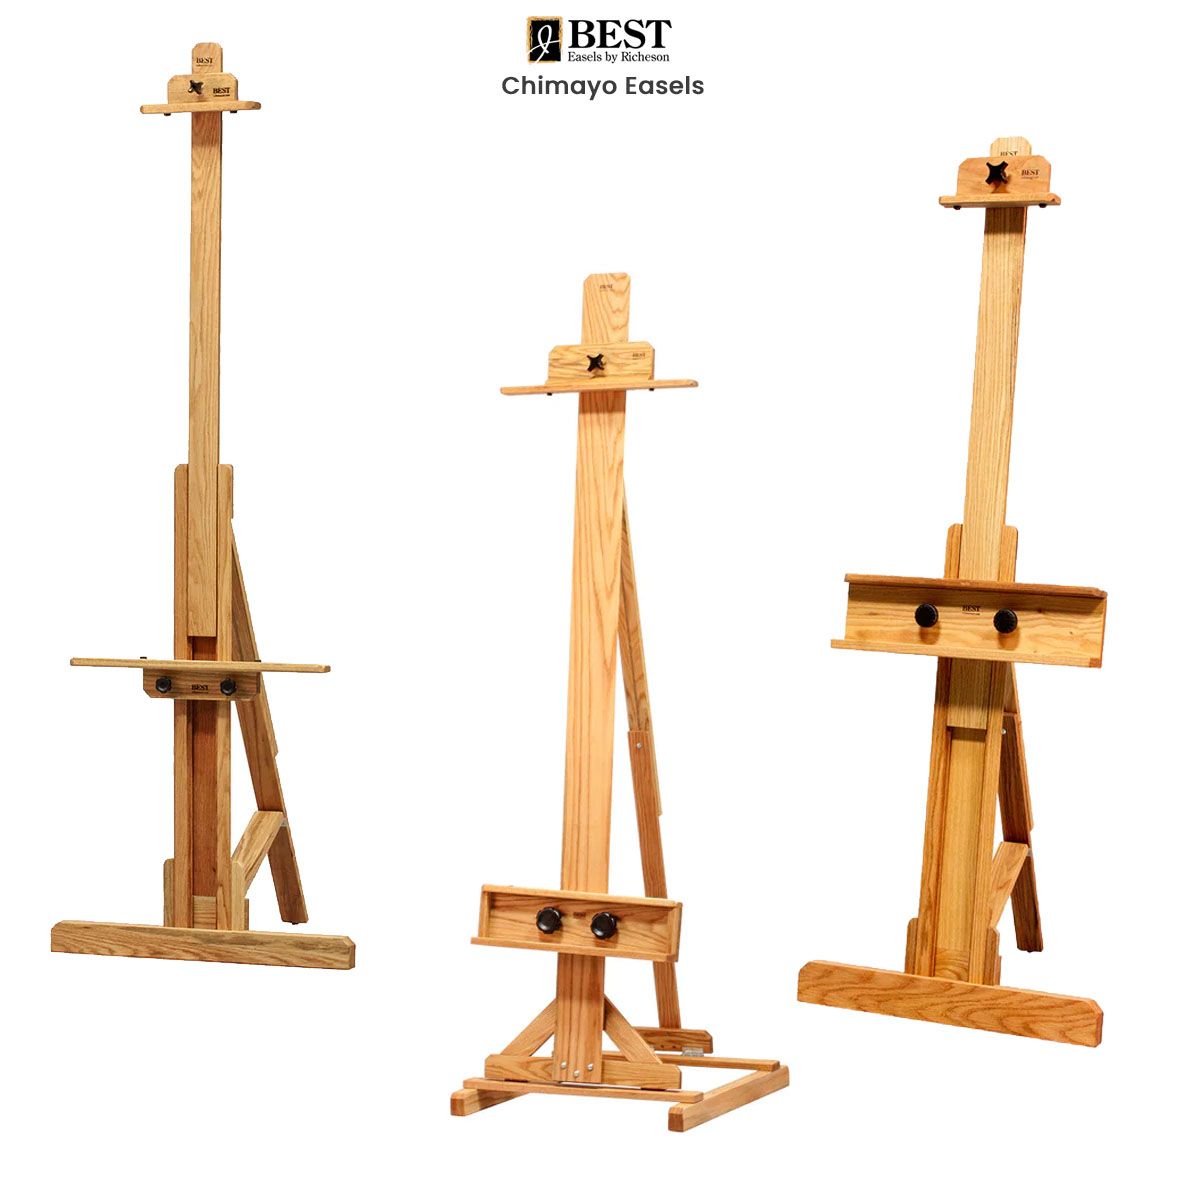 Best Ricehson Chimayo Easels